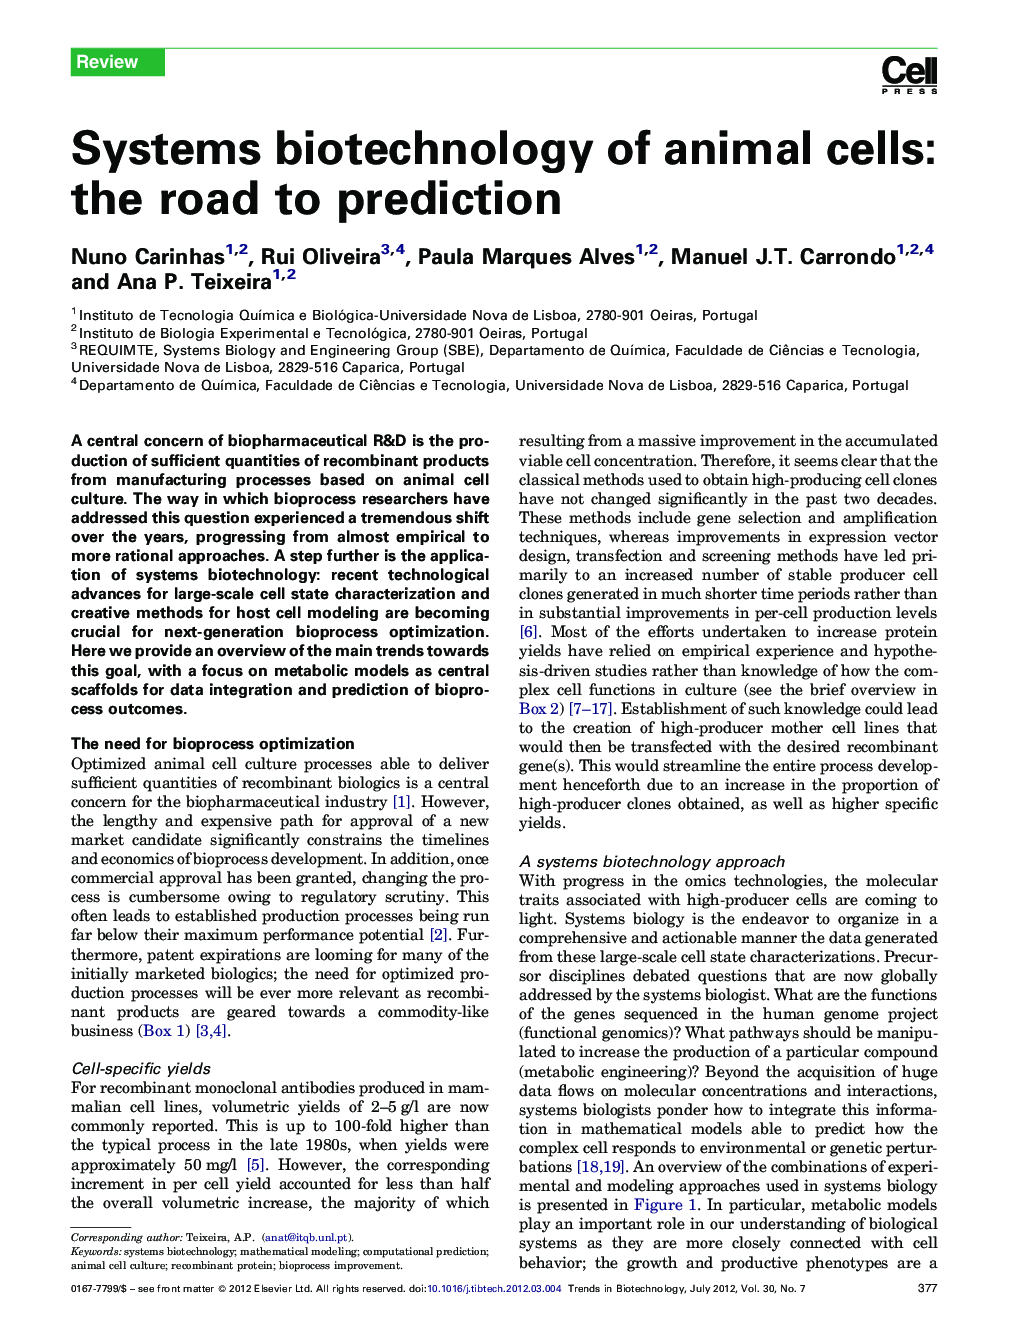 Systems biotechnology of animal cells: the road to prediction